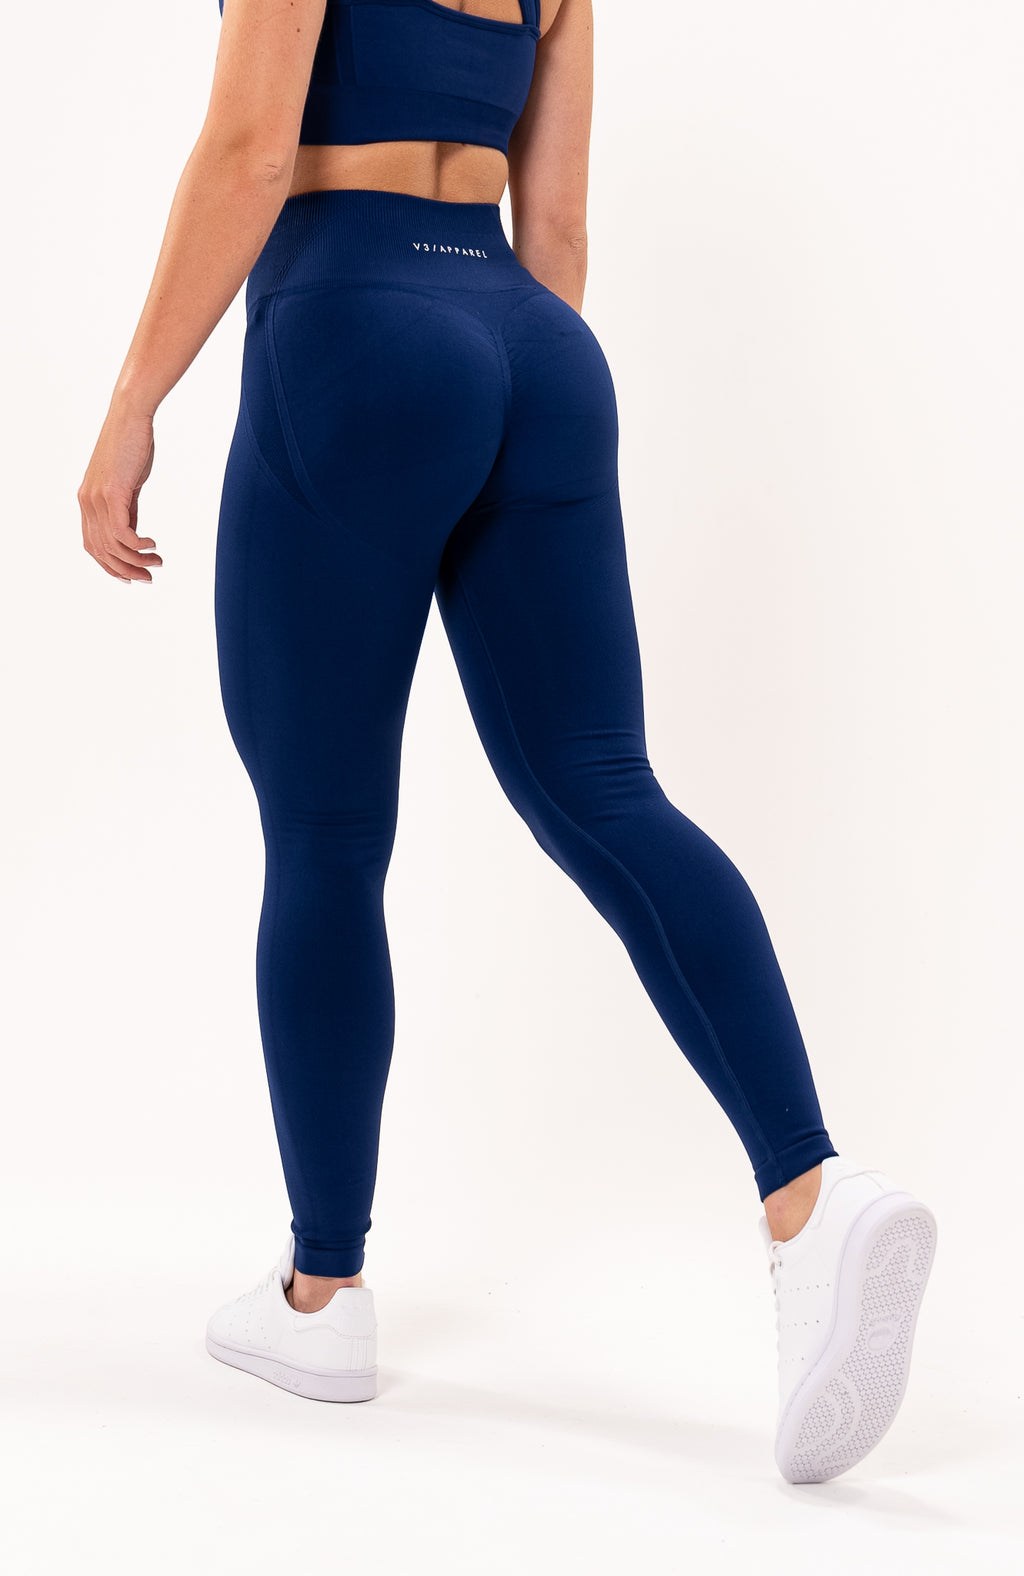 Sexy Seamless Textured Scrunch Bum Leggings Squat Proof HighWaist Yoga  Pants Fitness Outfit Ruched Booty Gym Wear Workout Tights